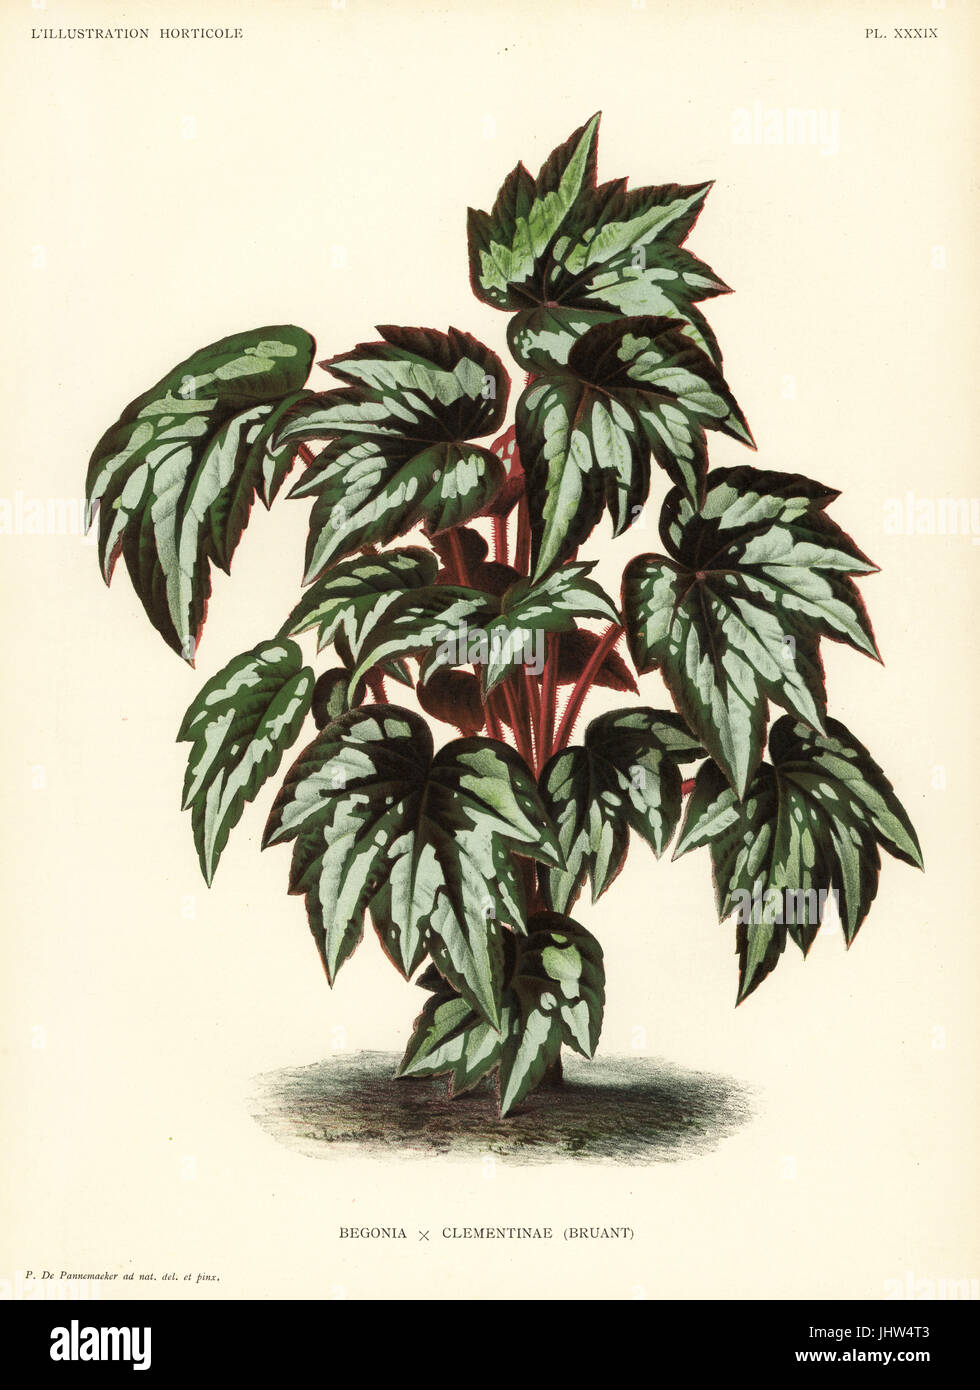 Princess Clementine's begonia, Begonia discolor x rex cv. clementinae. Drawn and chromolithographed by Pieter de Pannemaeker from Jean Linden's l'Illustration Horticole, Brussels, 1888. Stock Photo